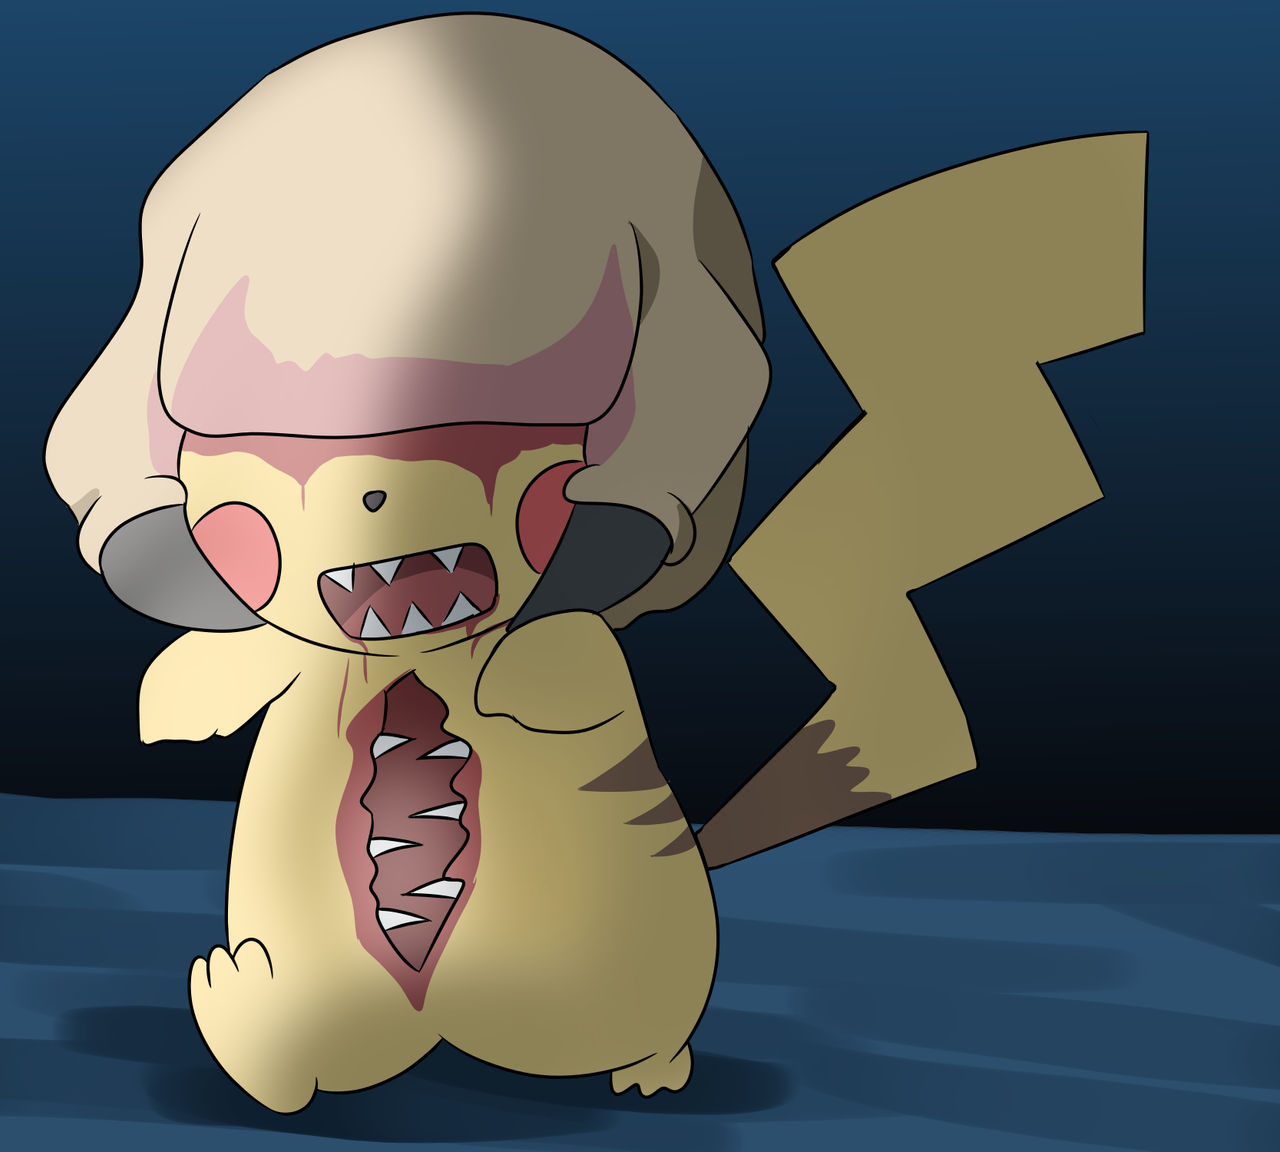 Funny/scary faces in pokemon by Kabutopsthebadd on DeviantArt